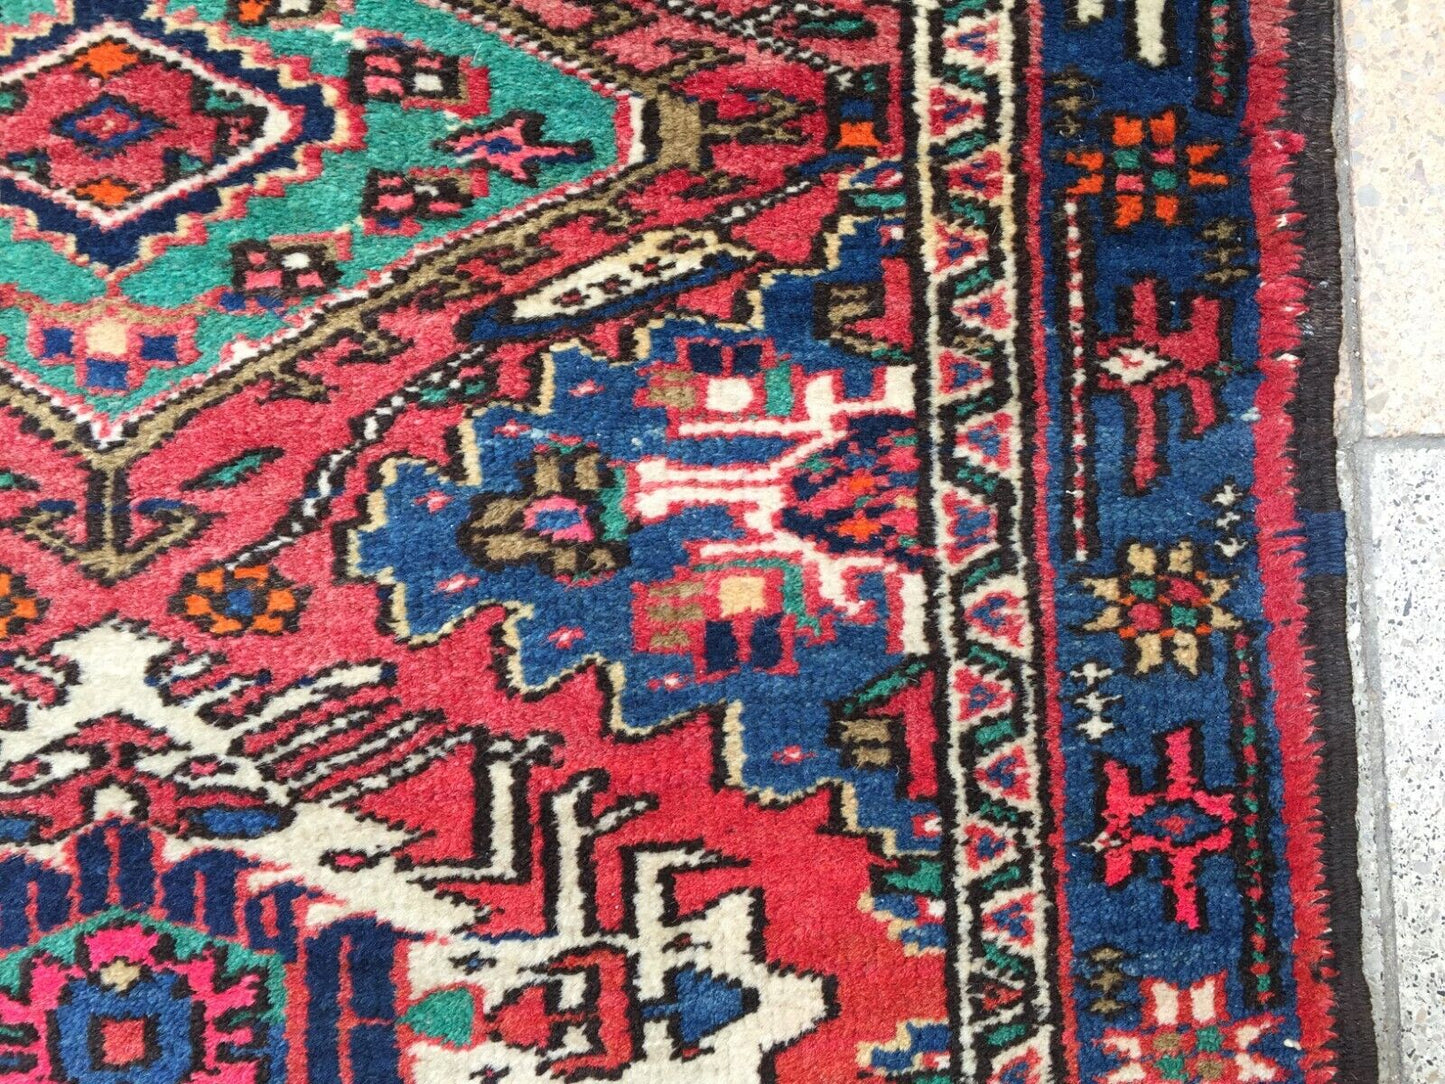 Intricate Red, Blue, and Green Designs Adorning Surface of Handmade Hamadan Rug - 1960s